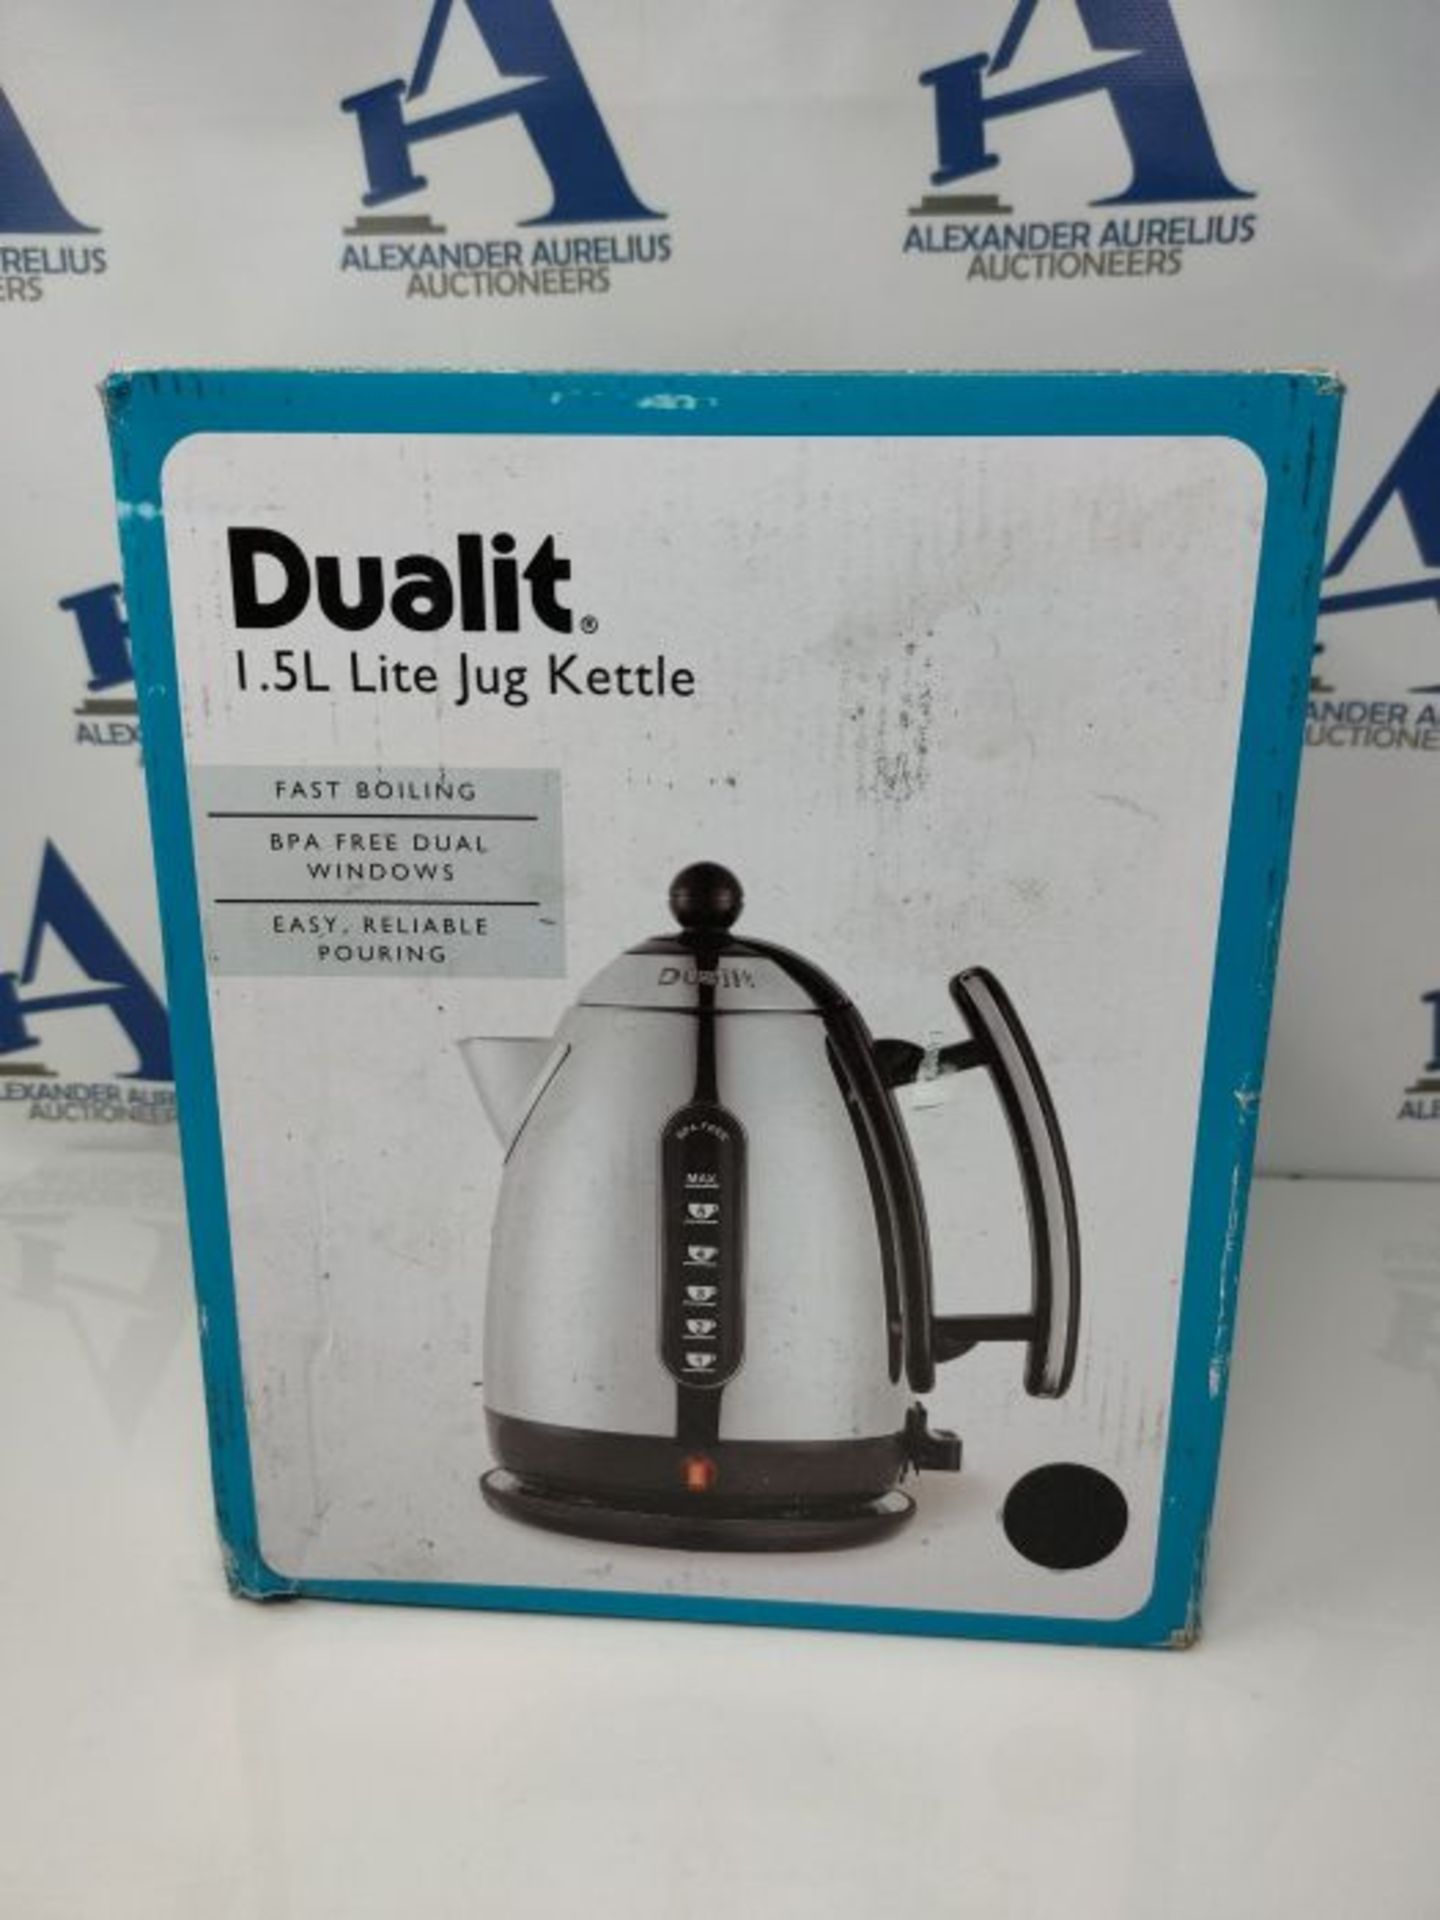 RRP £81.00 Dualit Lite Kettle - 1.5L Jug Kettle - Polished with Black Trim, High Gloss Finish - F - Image 2 of 3